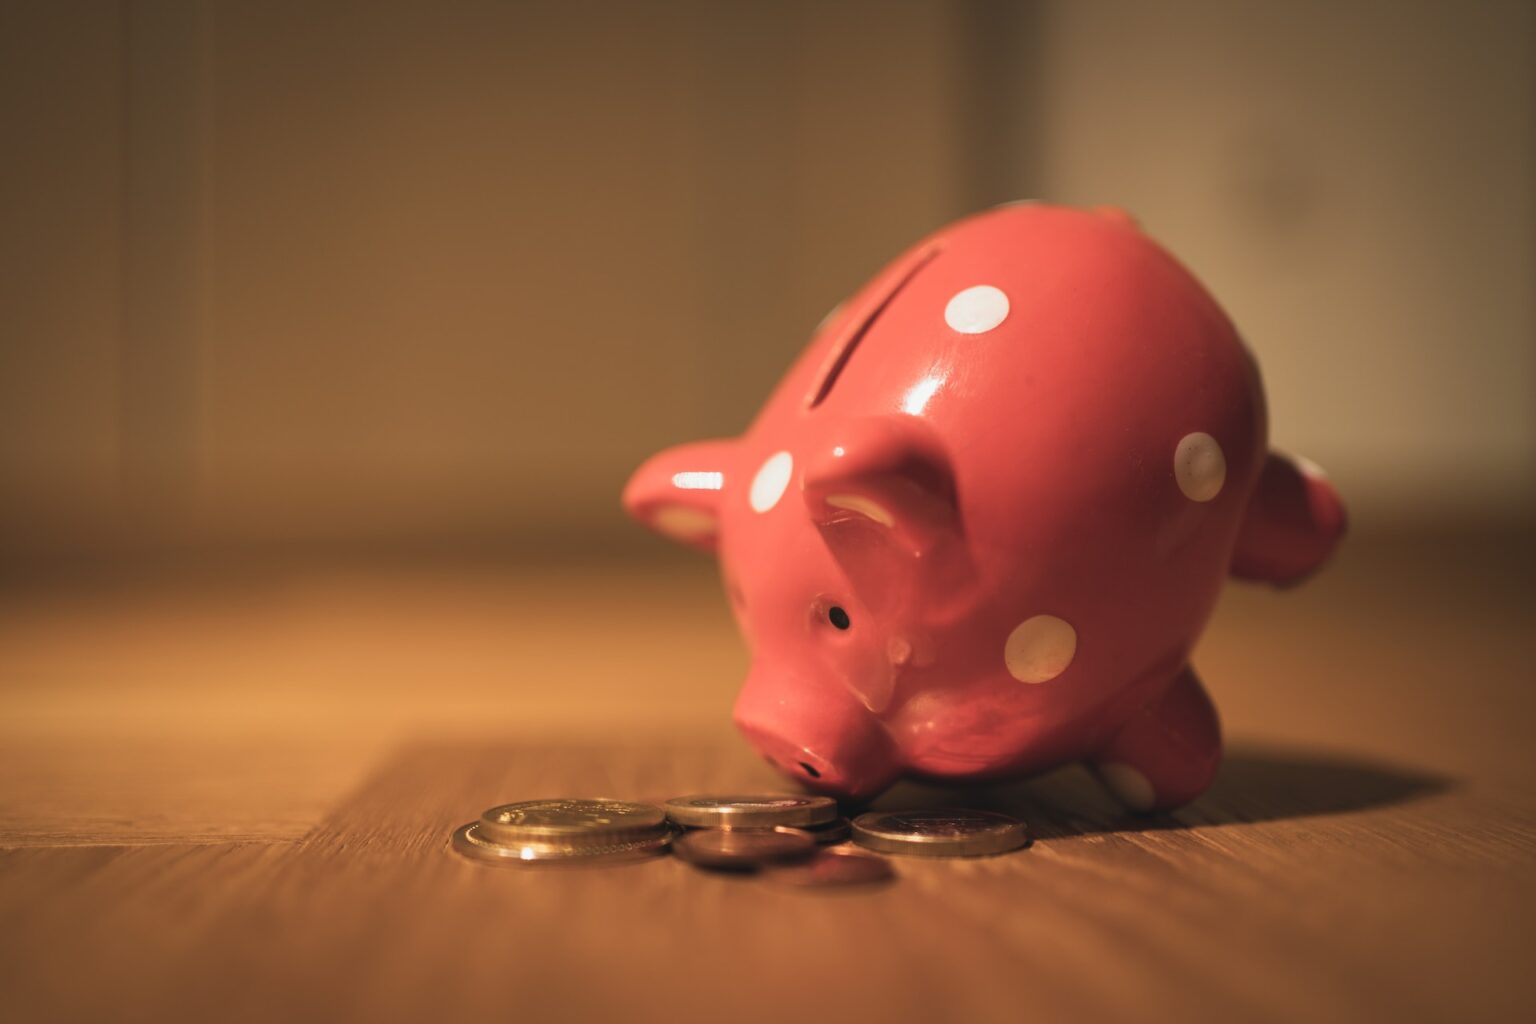 A pink, polka-dotted piggy bank lying on its side with coins scattered in front of it, resembling the playful decor one might find in a Texas dentistry waiting room.